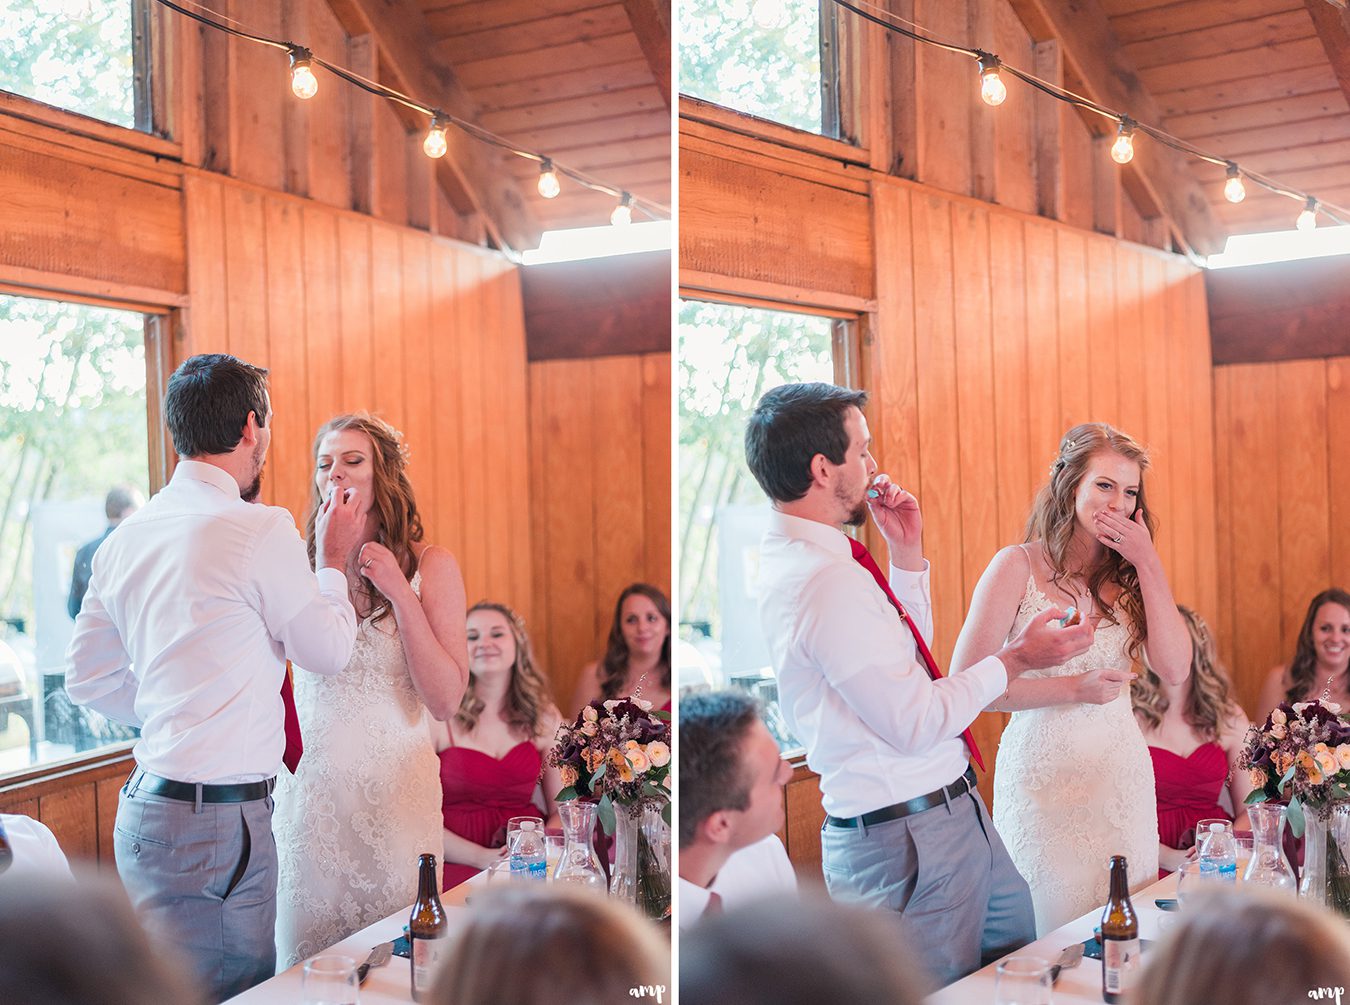 Bride and groom split a donut at their wedding reception at the mountain wedding garden in crested butte